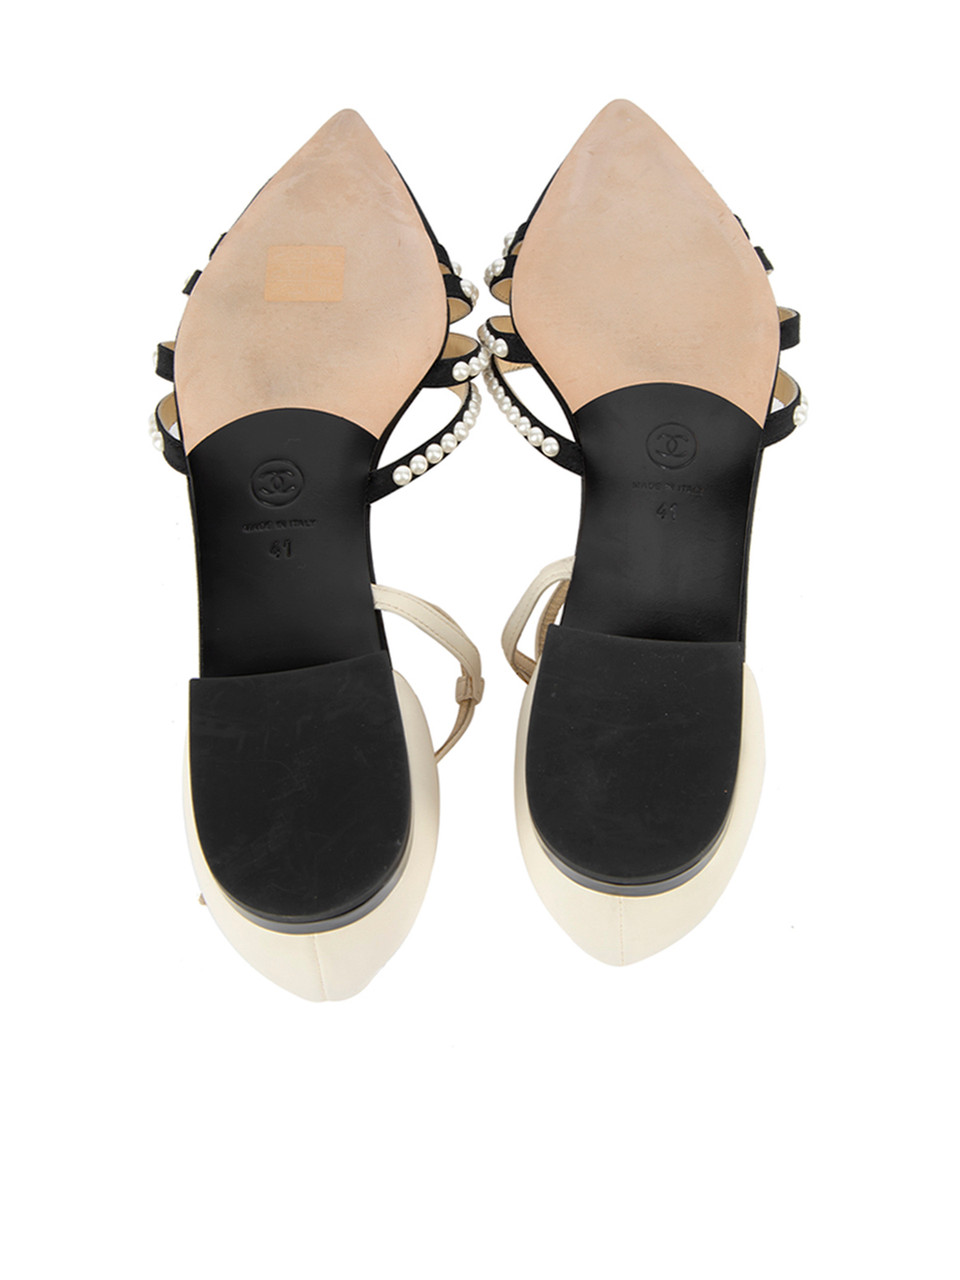 Chanel Black and Cream Pearl Detail Pointed Toe Ballet Flats